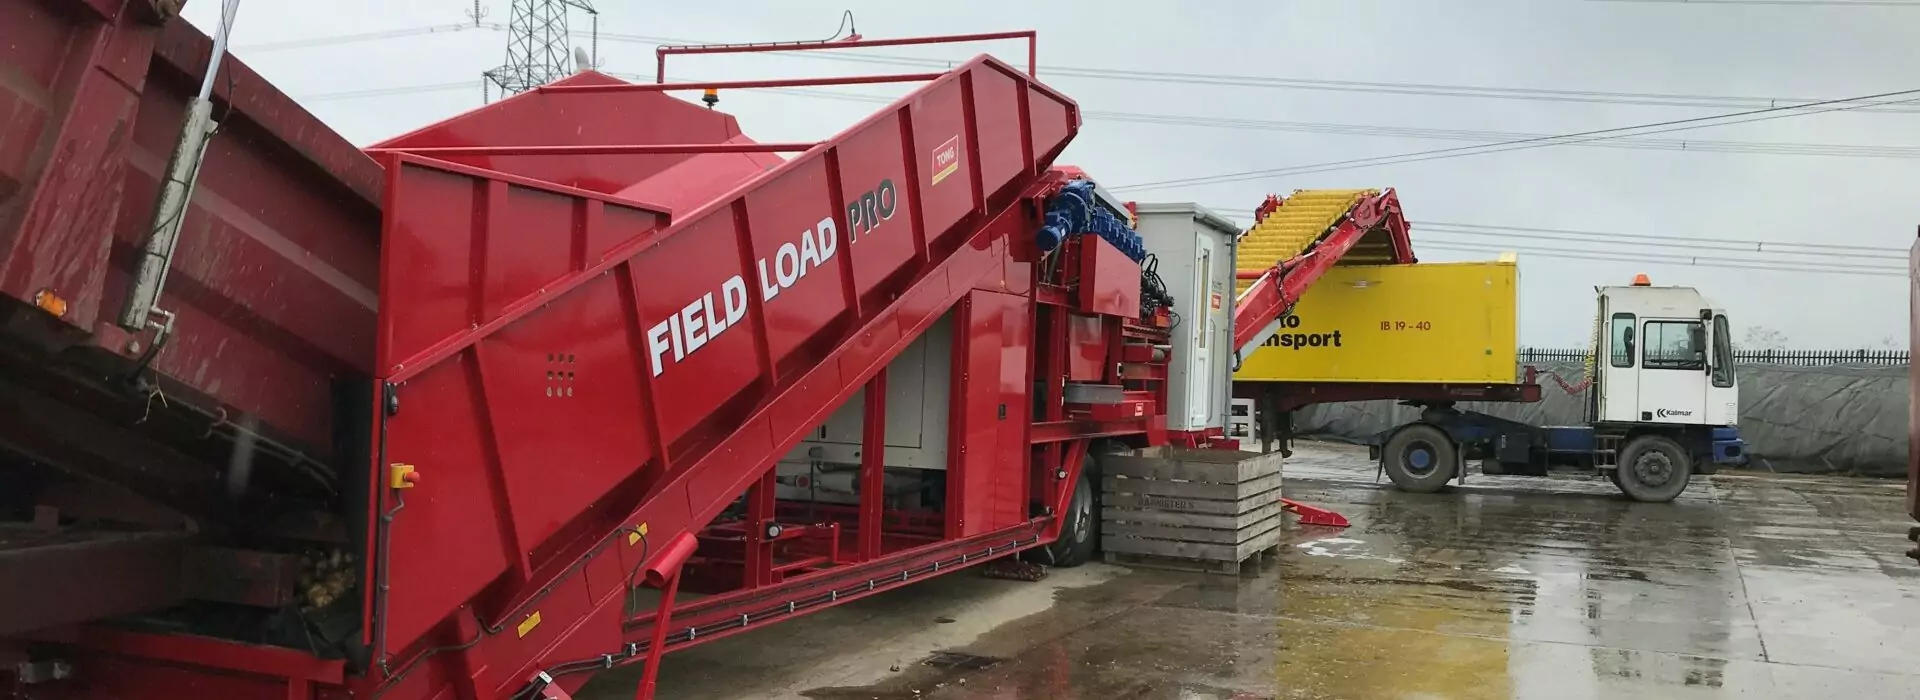 Tong's New FieldLoad PRO - In-field Cleaning and Loading, Potatoes, Parsnips, carrots and Vegetable M H Poskitt Ltd